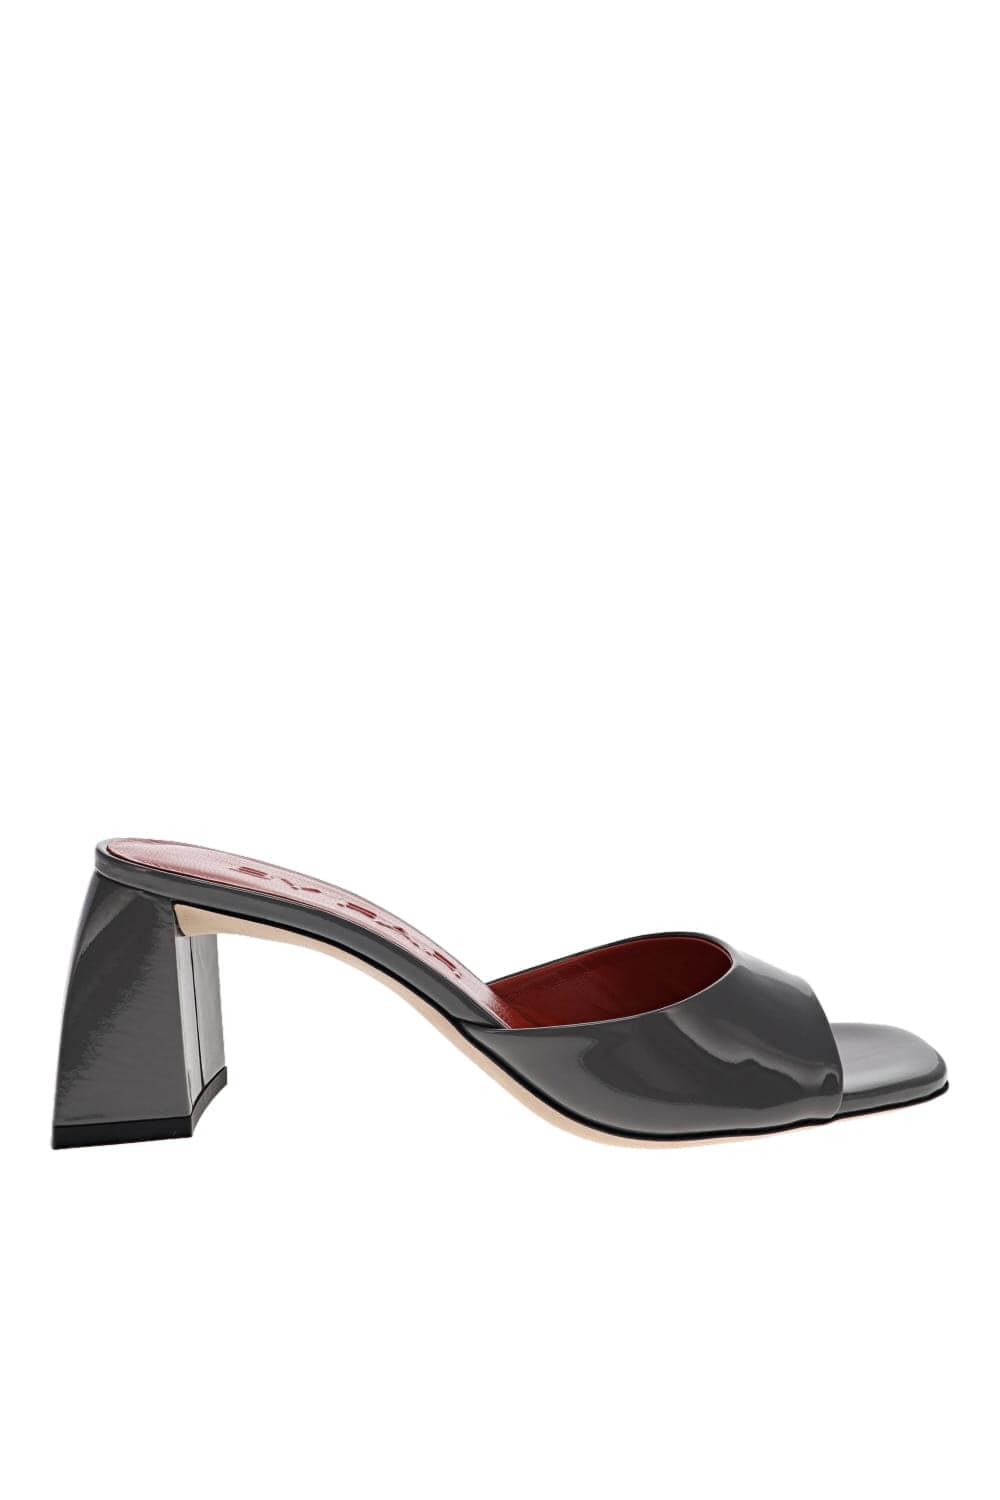 BY FAR Romy Cement Patent Leather Mules